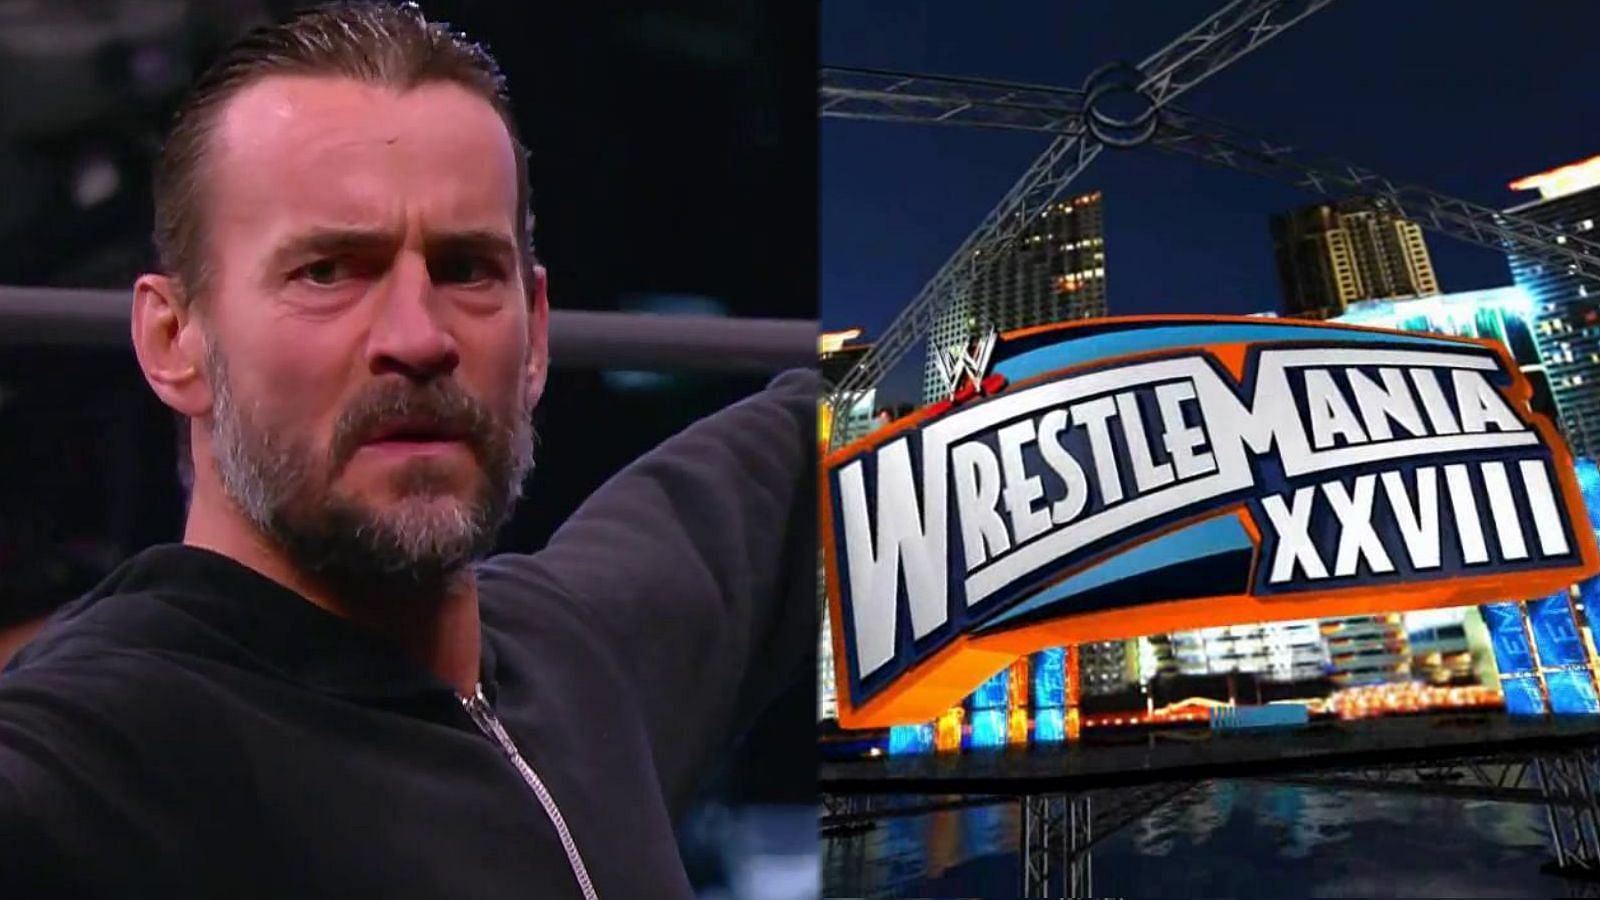 Could Punk still be upset about missing this WWE milestone?